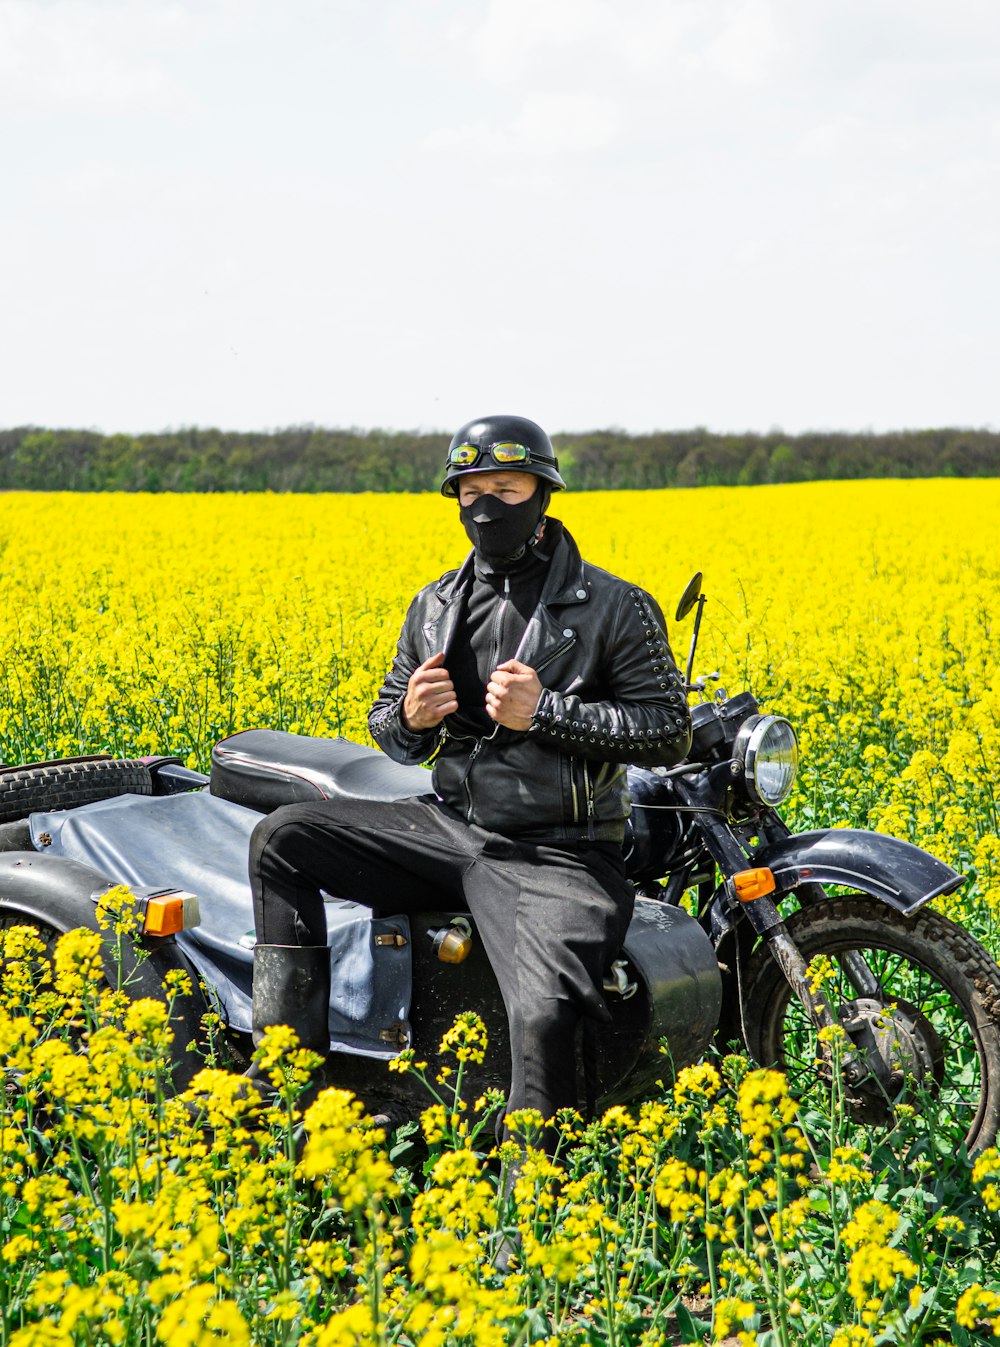 man in black jacket riding motorcycle on yellow flower field during daytime